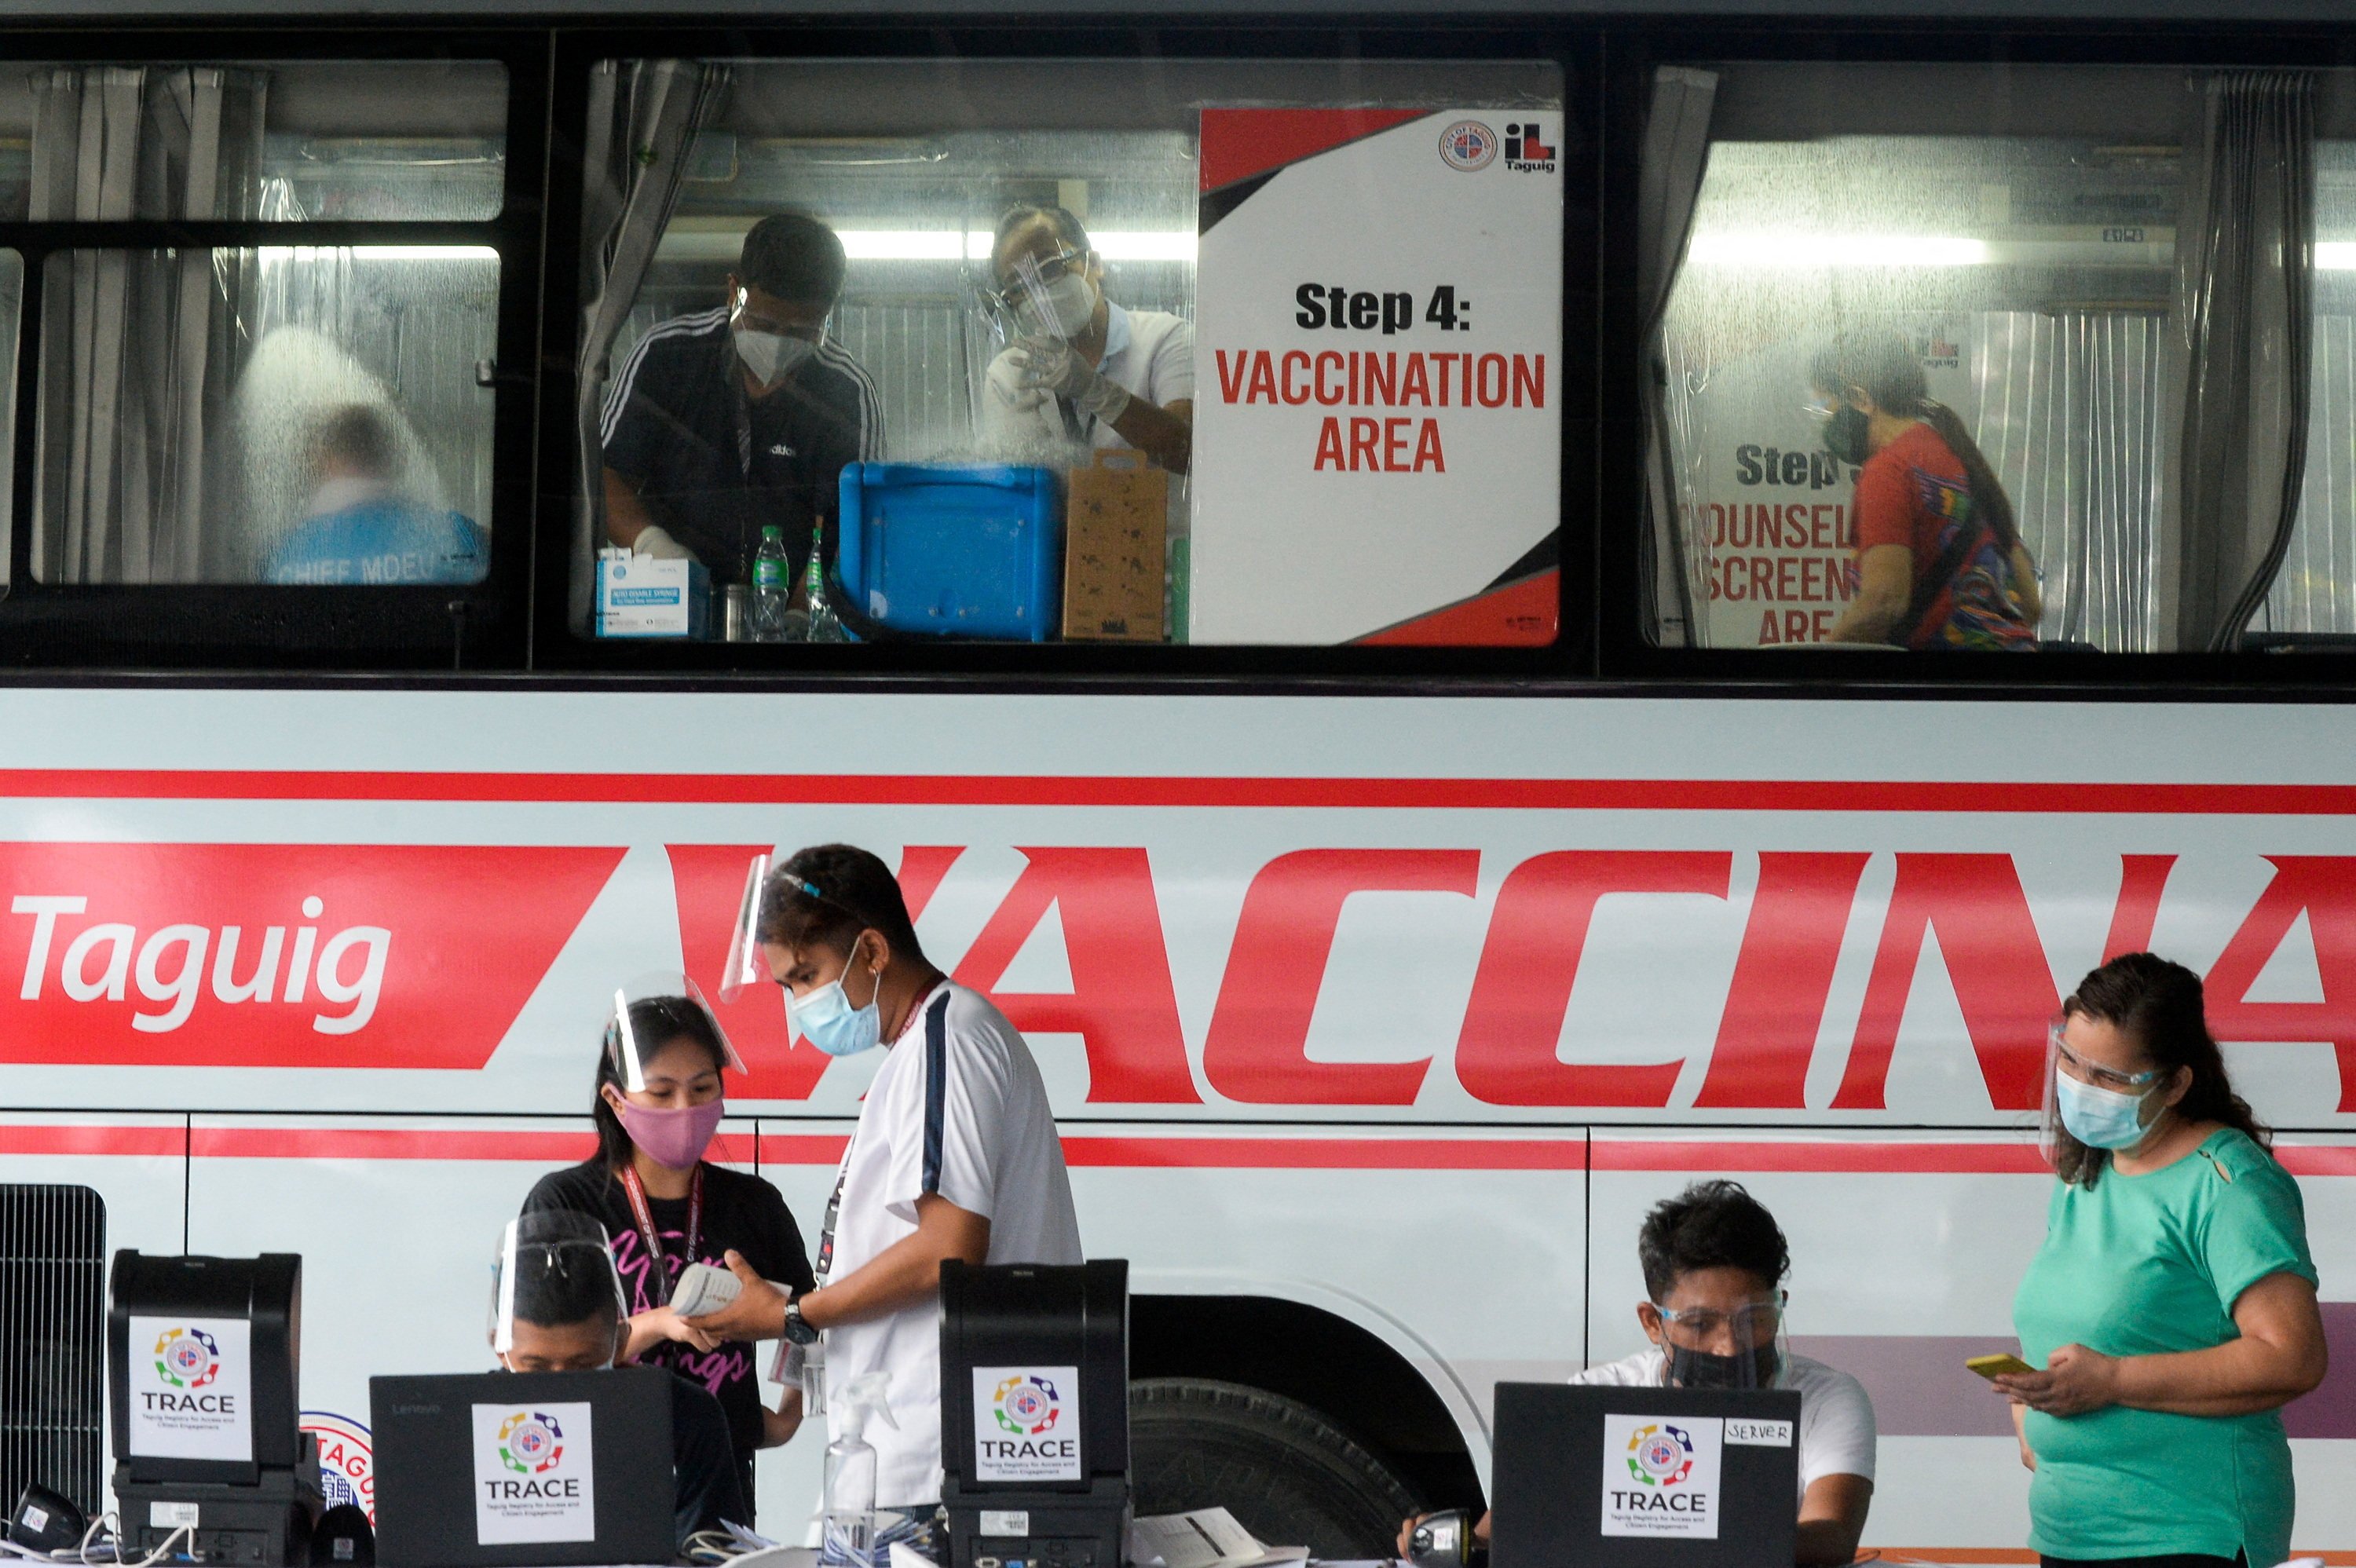 Health workers encode information and prepare vaccines against Covid-19 at a mobile vaccination site in Taguig, Philippines on May 21, 2021. Photo: Reuters